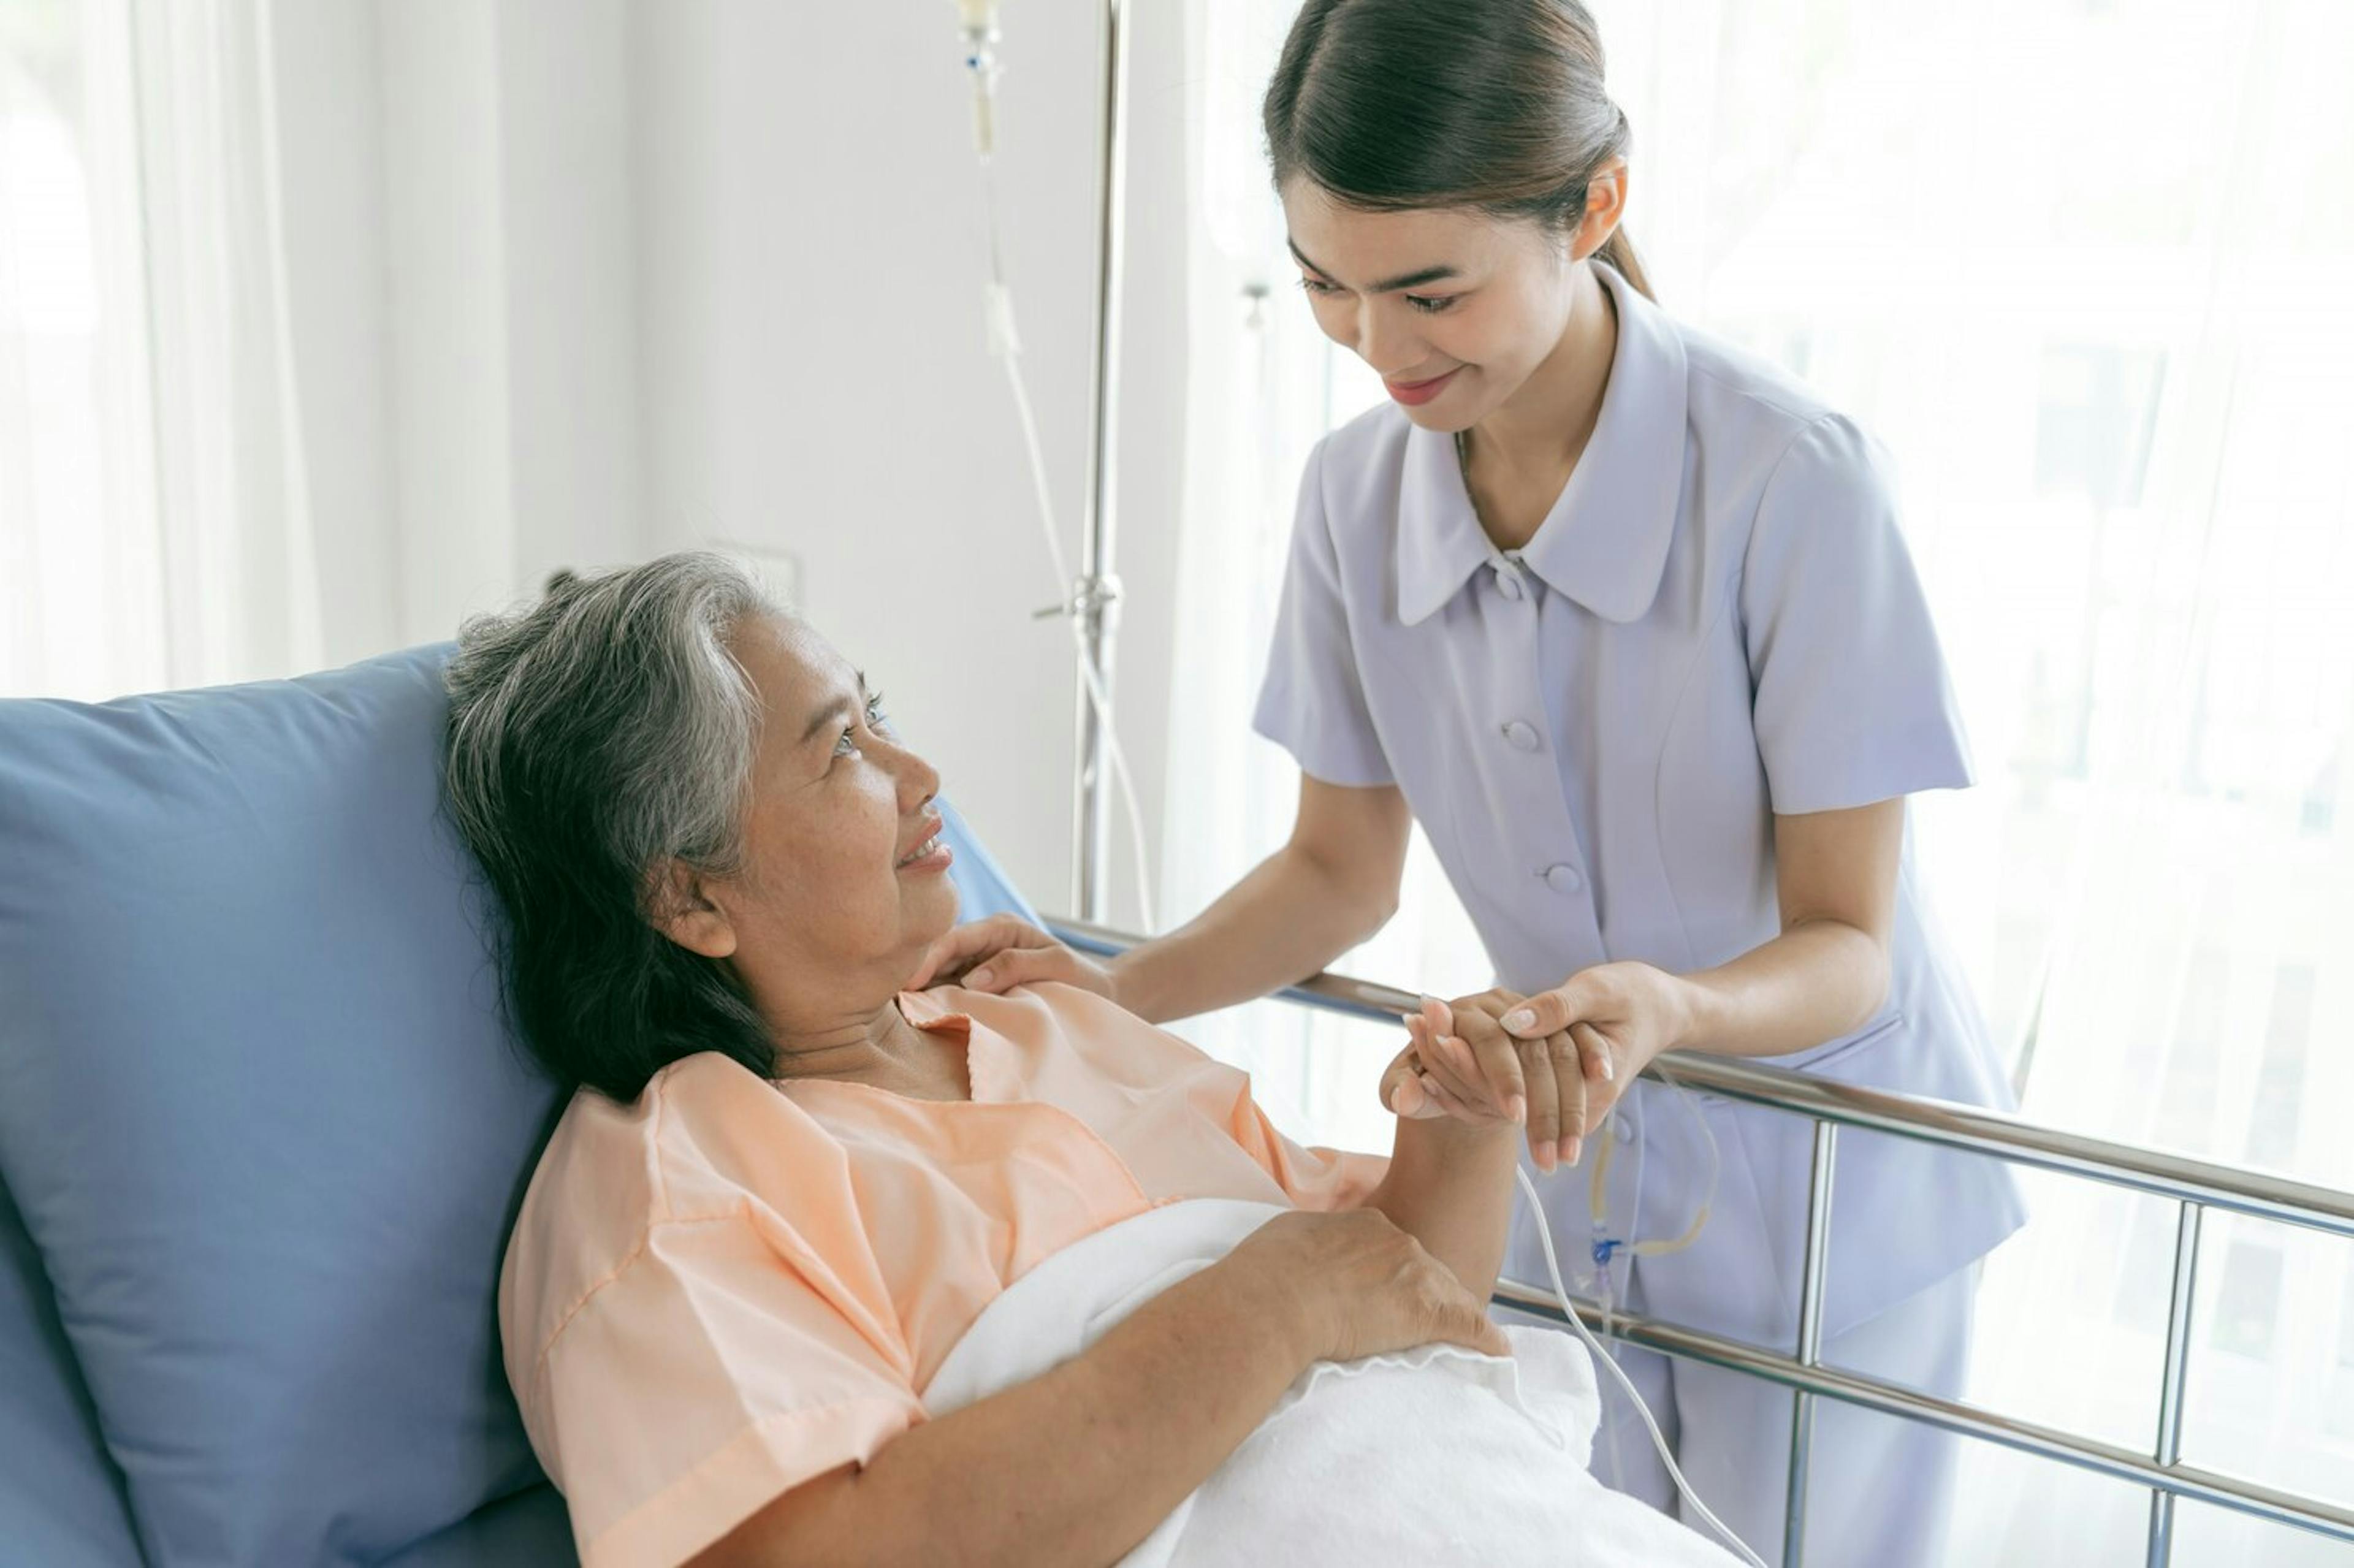 Photo： <a href="https://www.freepik.com/free-photo/doctors-hold-hands-encourage-elderly-senior-woman-patients-hospital-senior-female-medical-healthcare-concept_7810034.htm#query=filipino%20domestic%20helper%20elderly&position=32&from_view=search&track=ais&uuid=576f190f-cb29-4ec7-a4e9-1b84a51f75a5">Image by jcomp</a> on Freepik